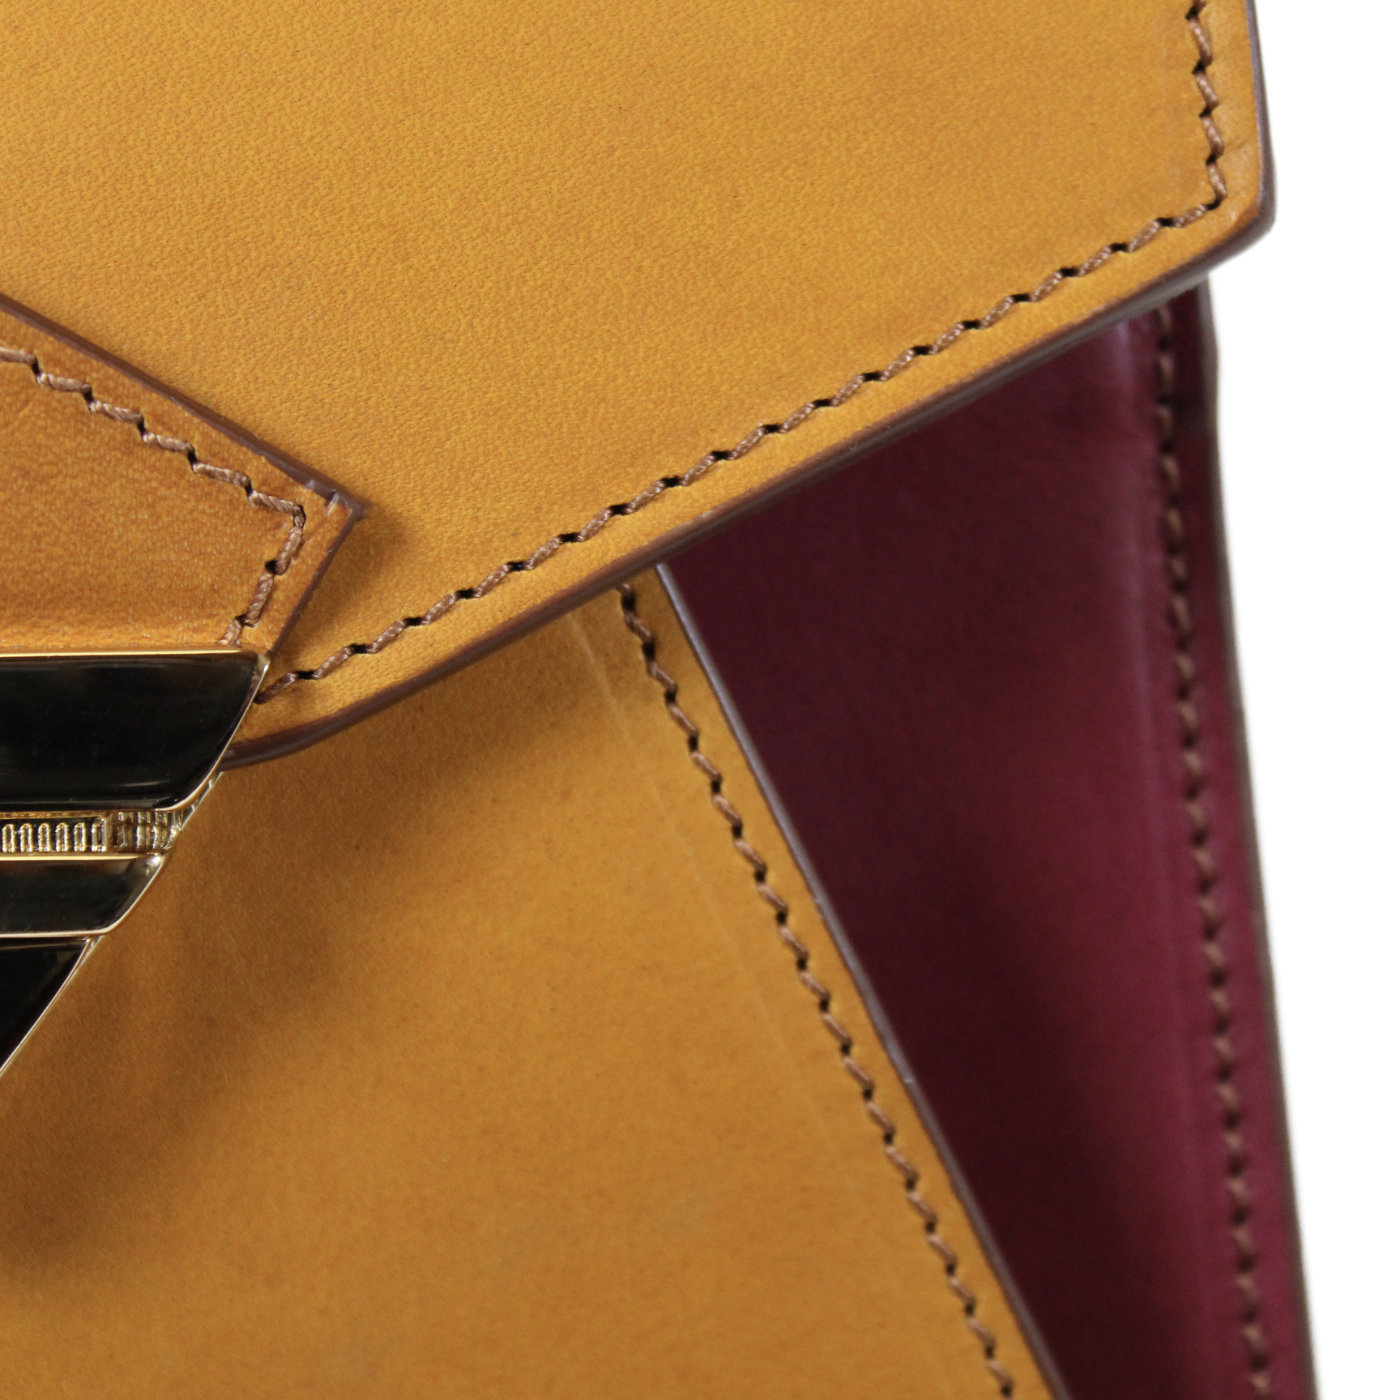 How to identify real Italian leather easily